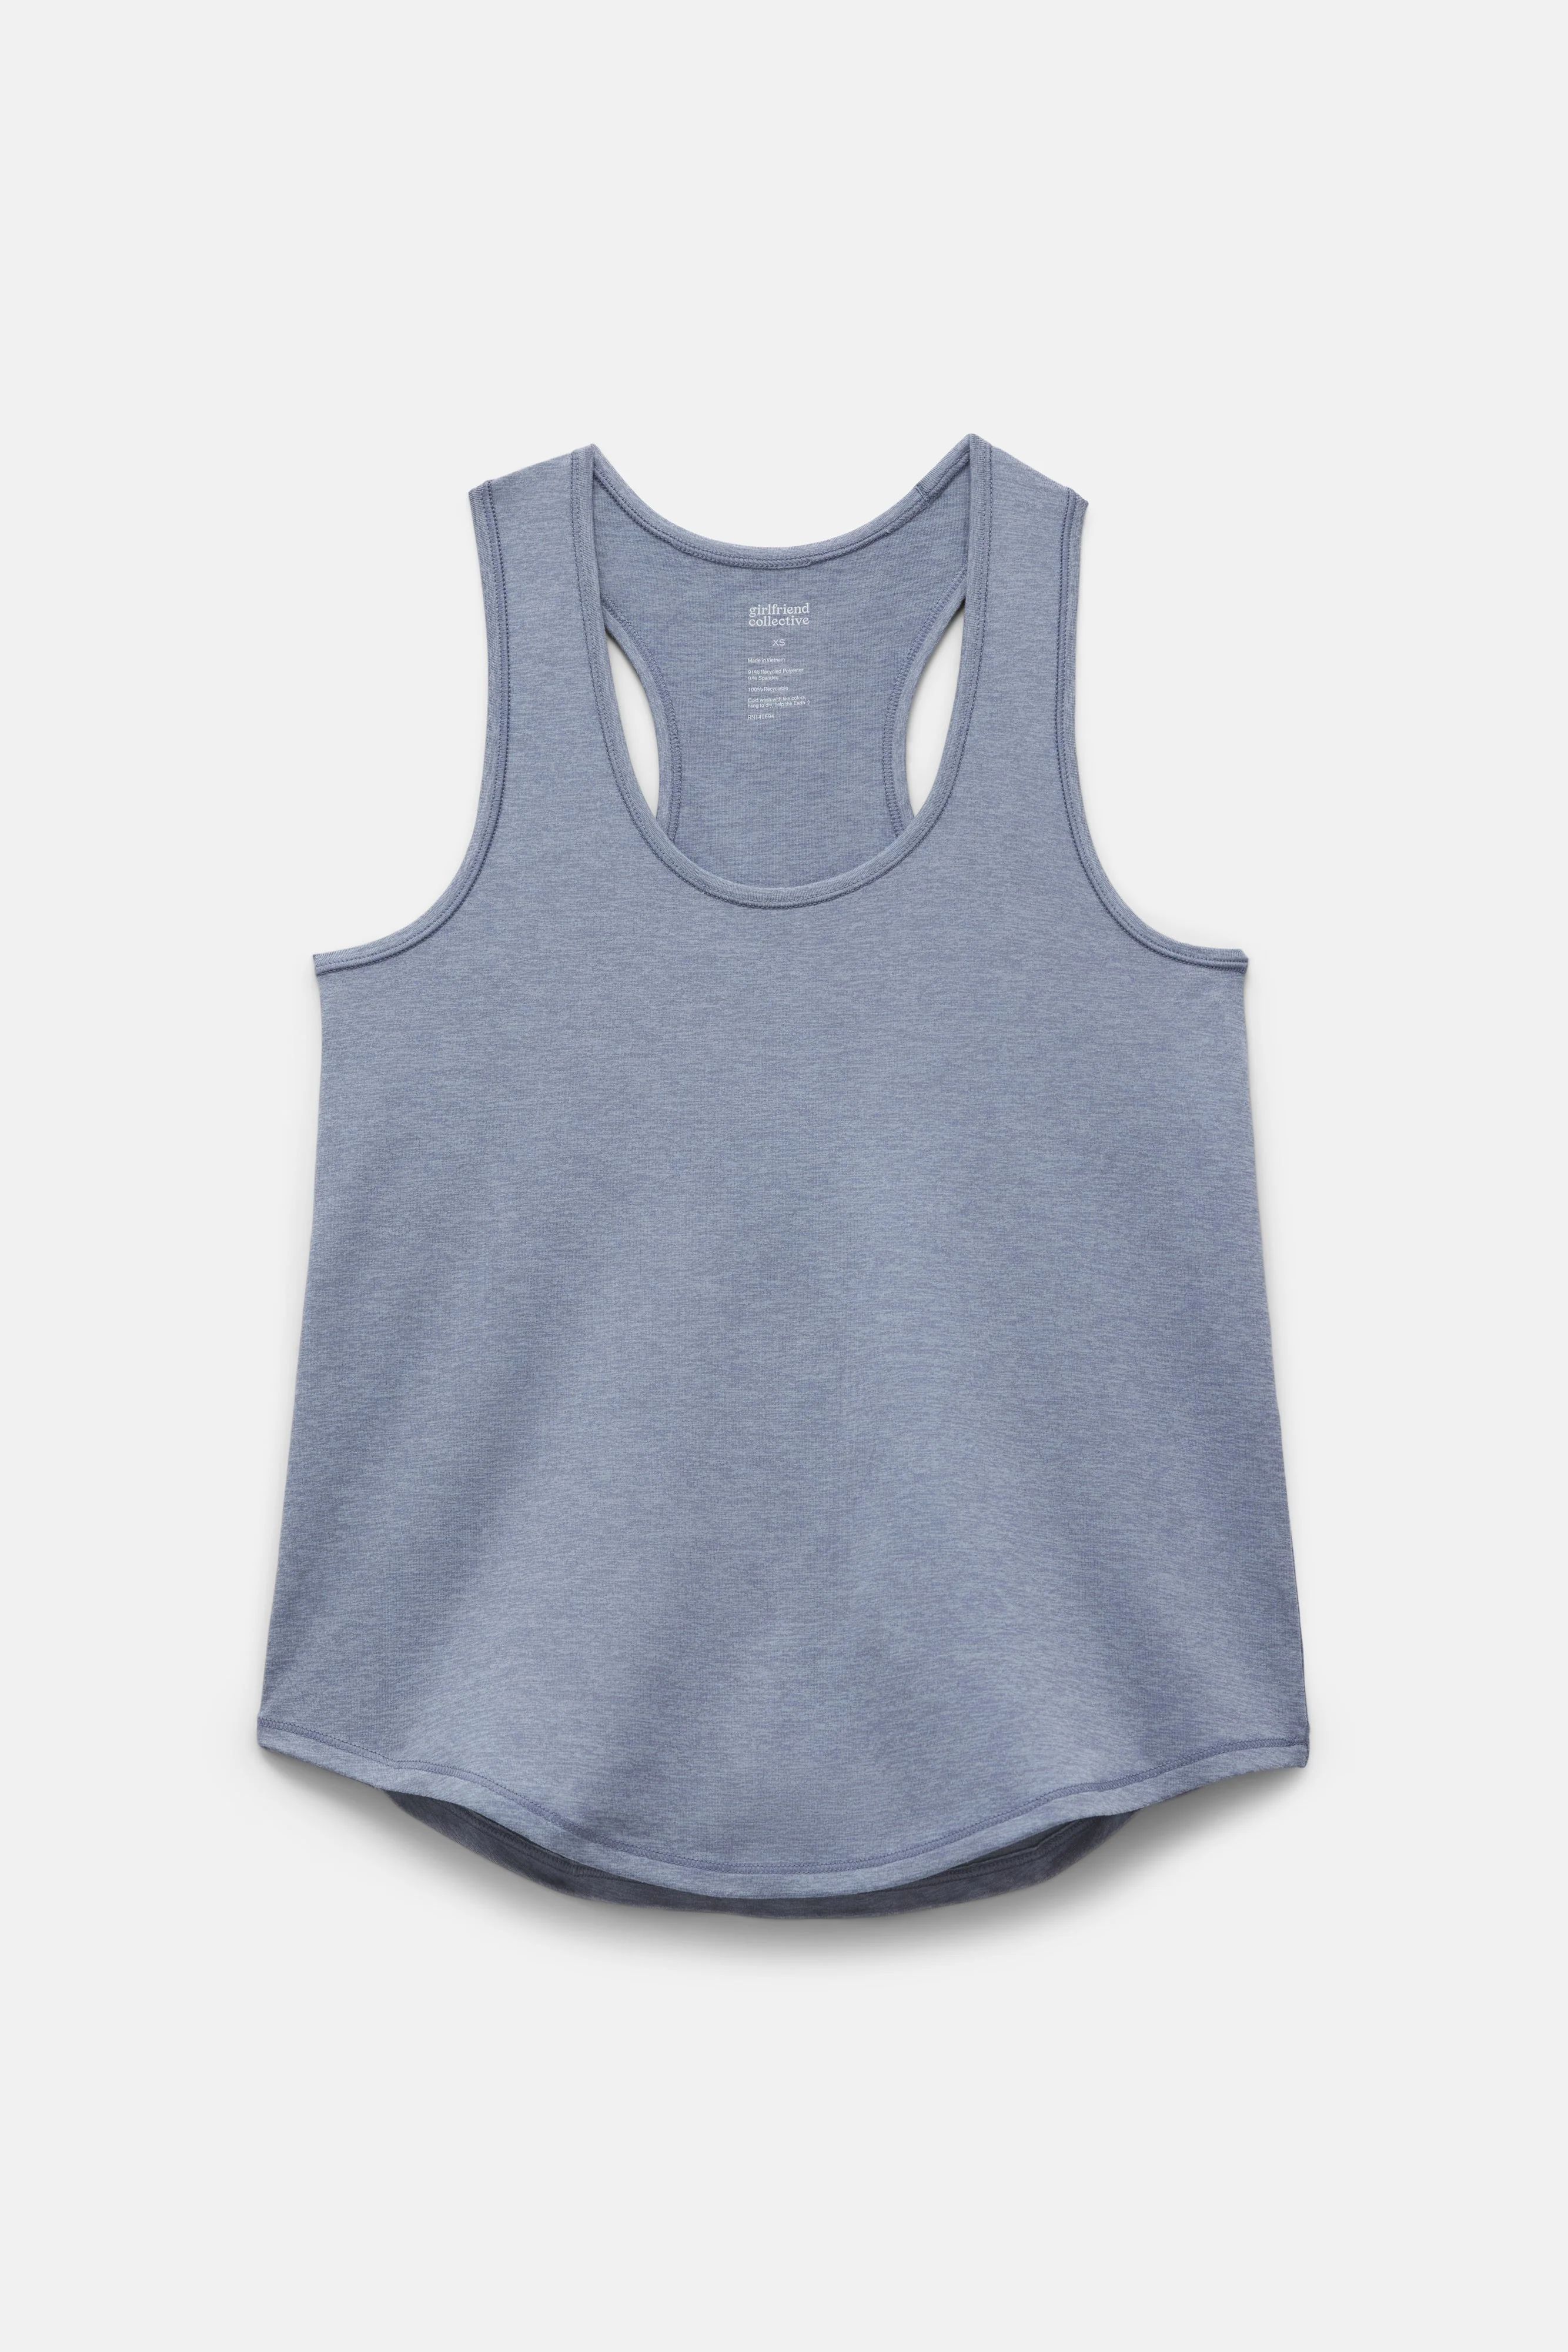 Meteor ReSet Relaxed Tank | Girlfriend Collective